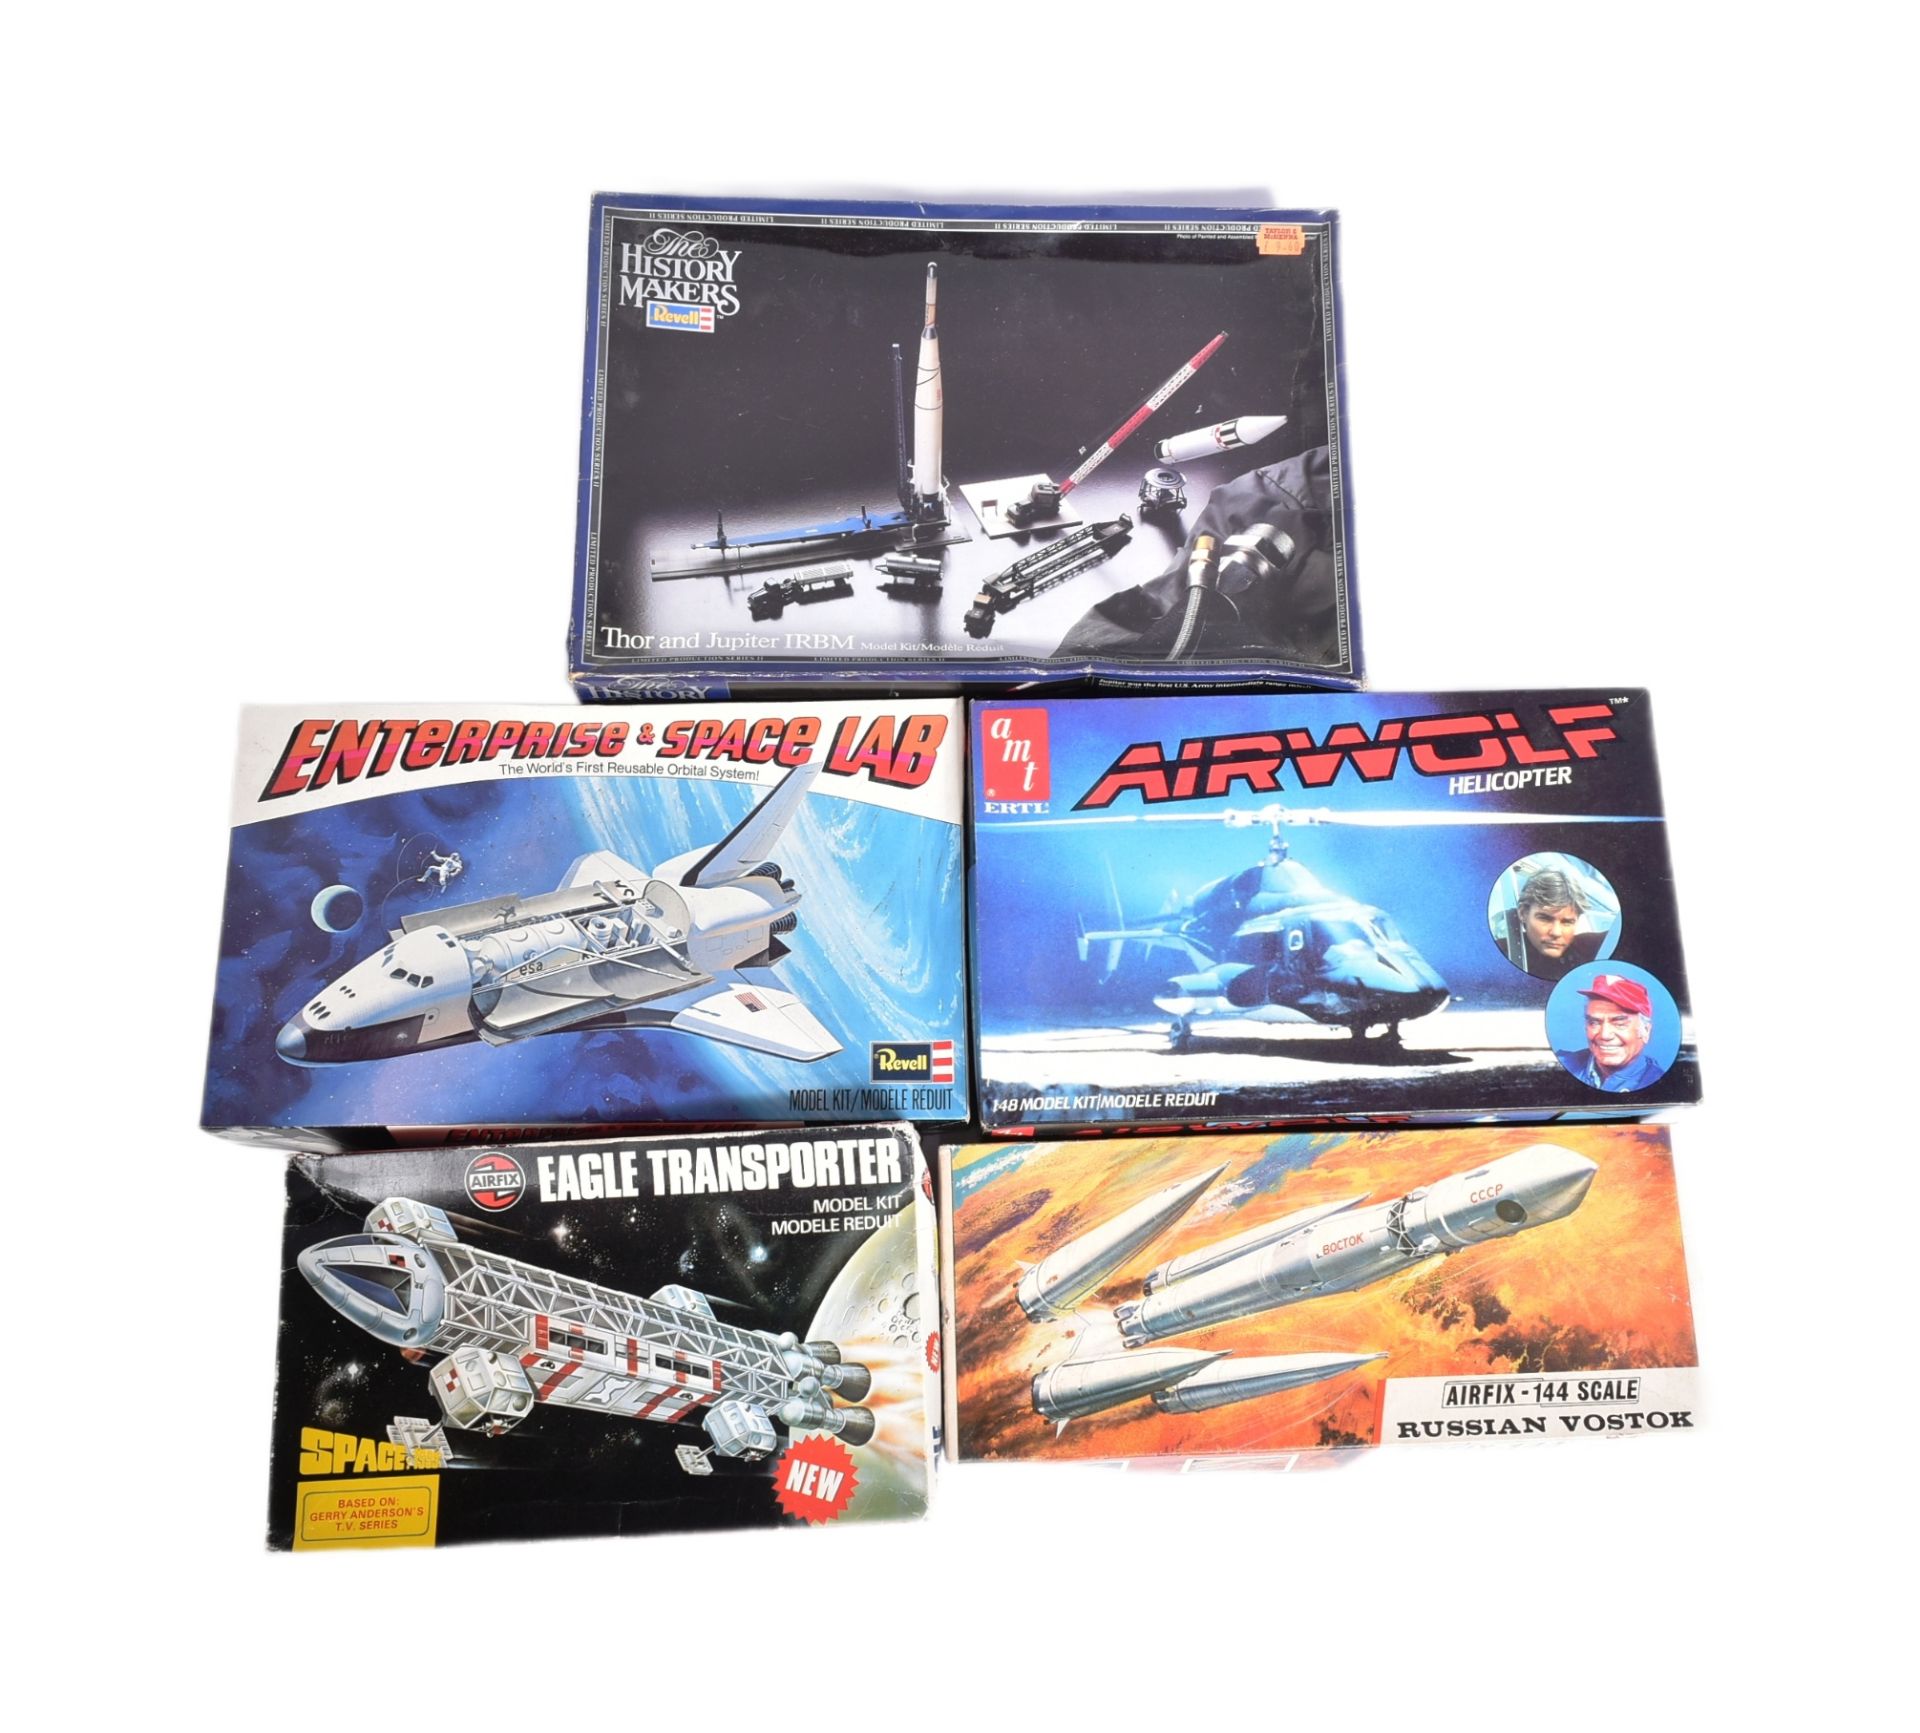 MODEL KITS - COLLECTION OF SPACE THEMED MODEL KITS